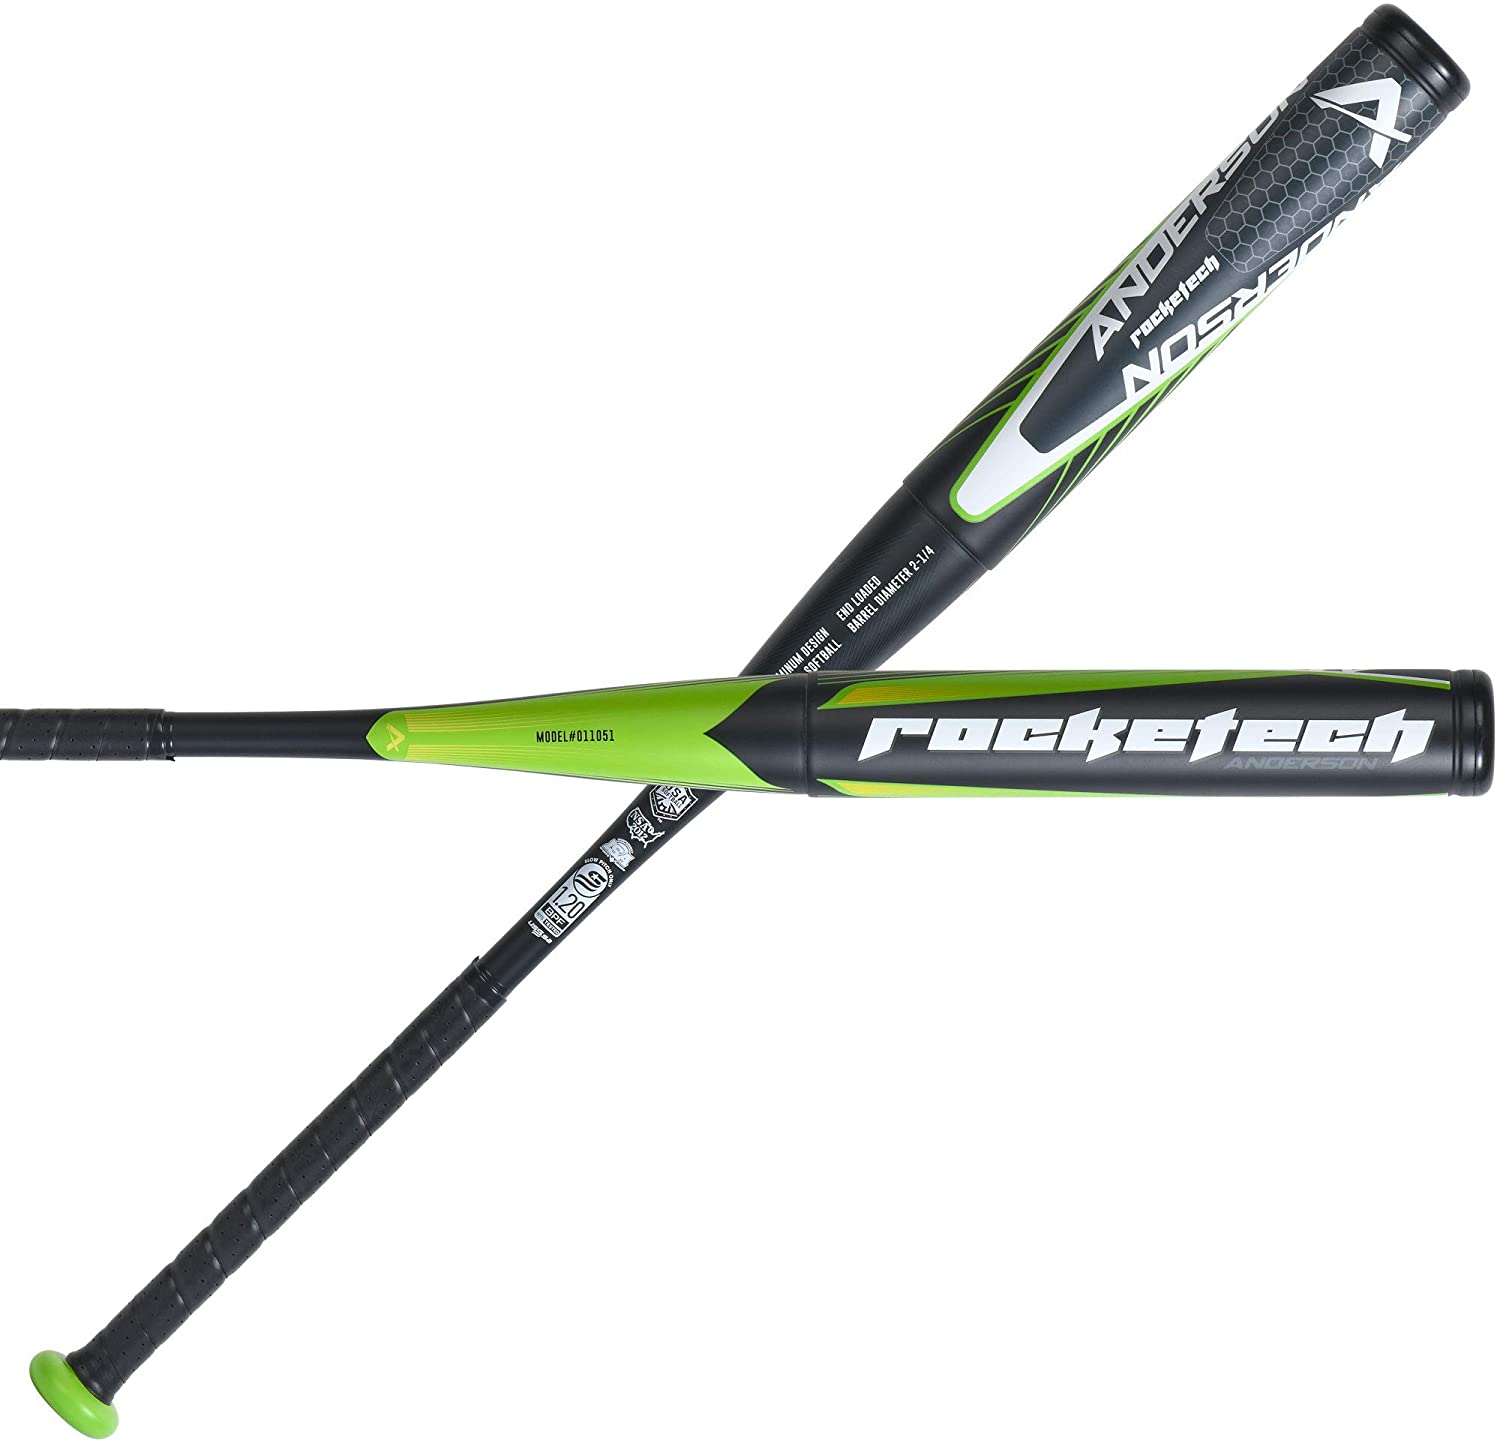 anderson-rocketech-2021-slowpitch-softball-bat-34-inch-26-oz 0110513-3426 Anderson  For over 15 years the Anderson Rocketech has been dominating the